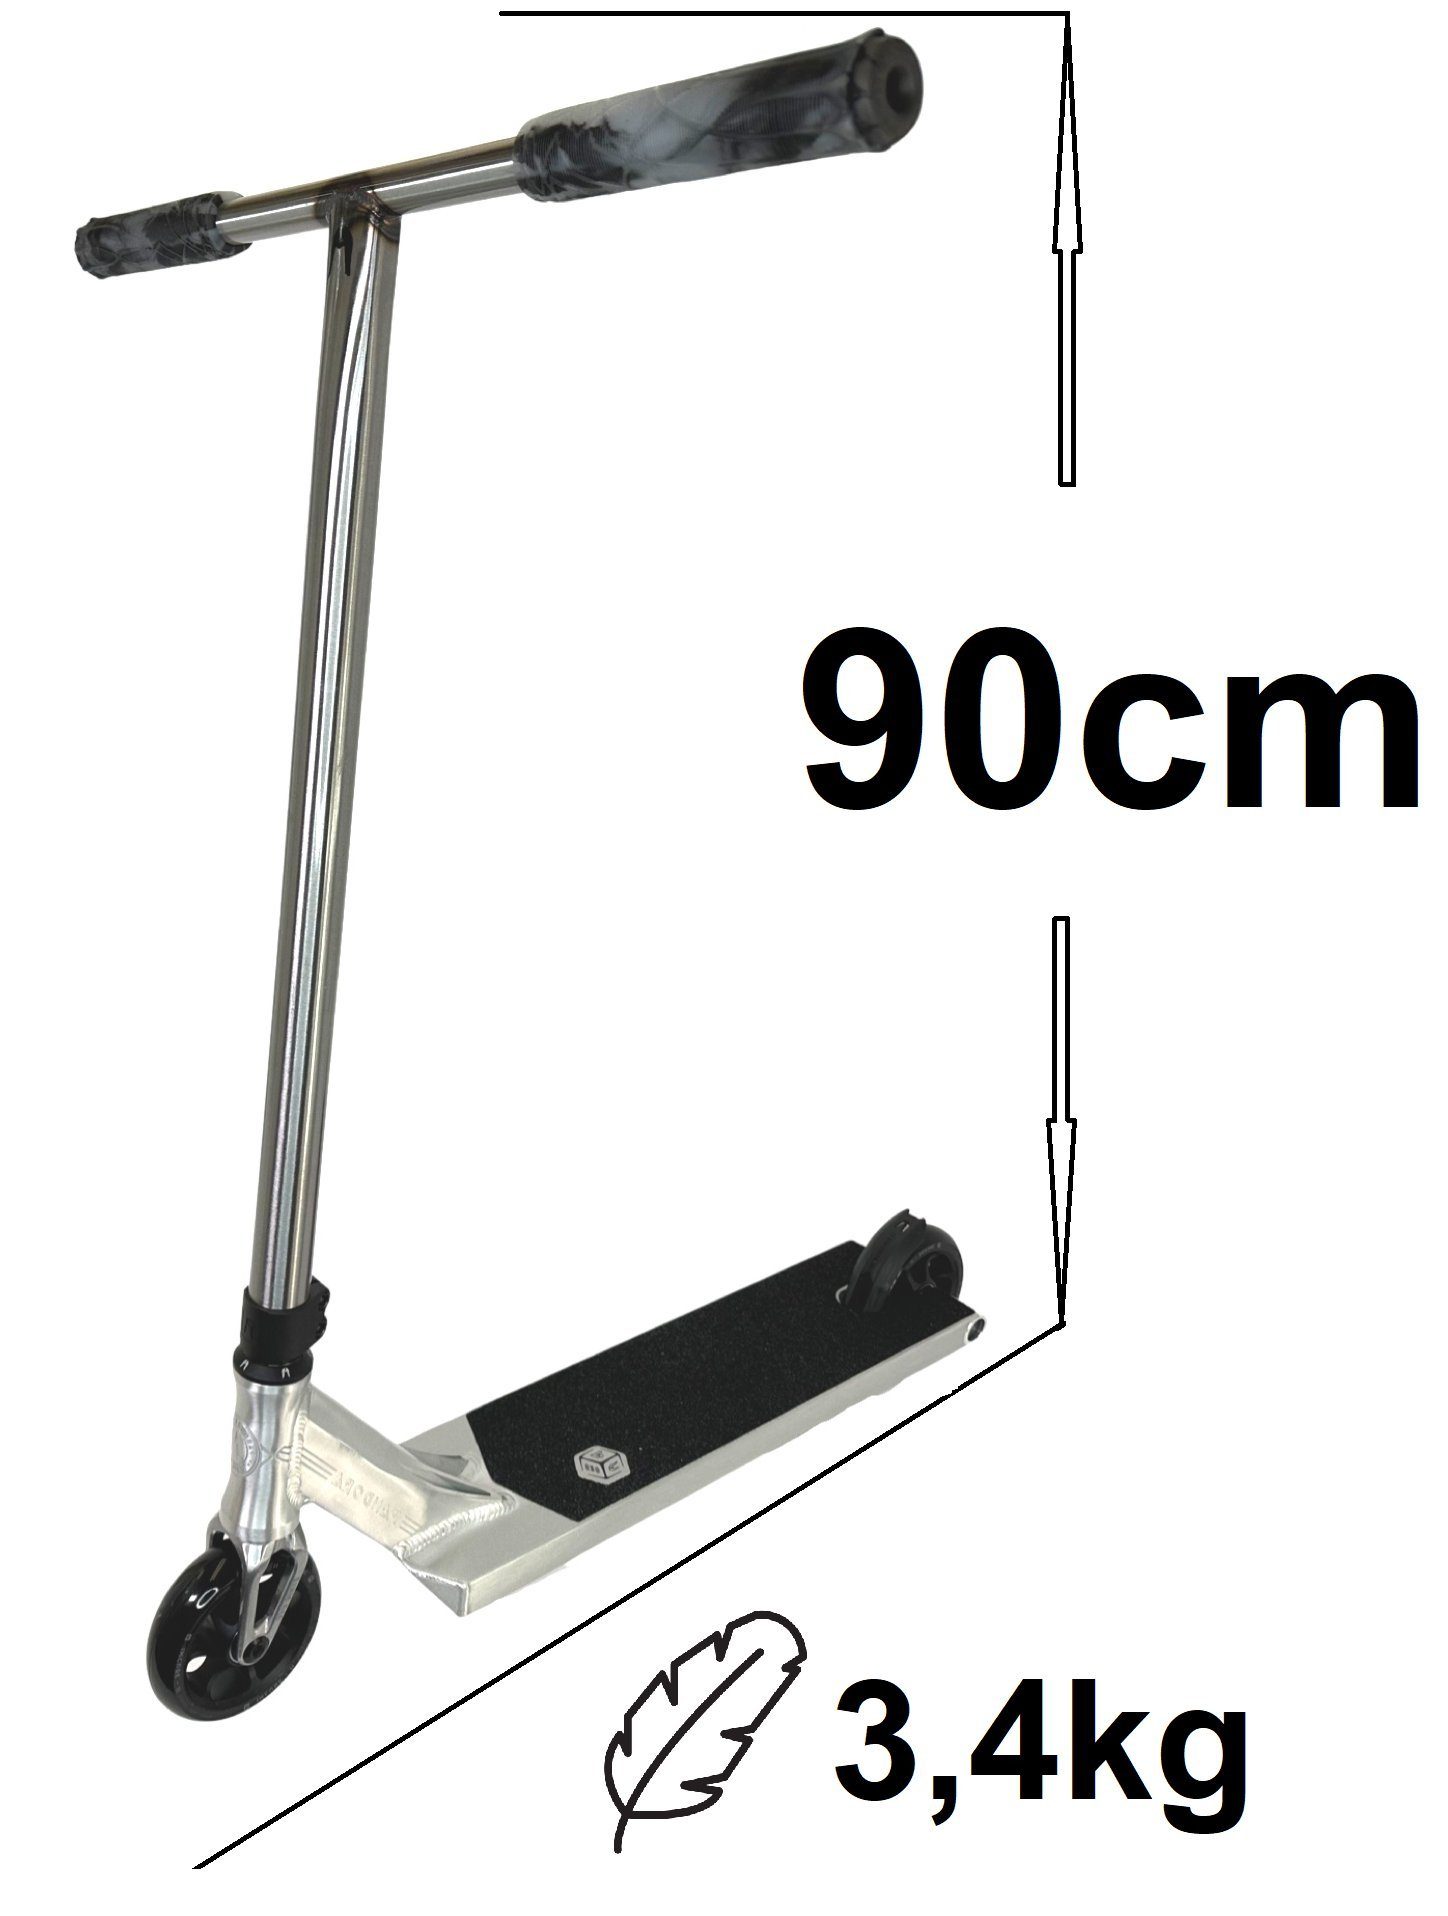 Silber L Ethic DTC 3,4kg Stunt-Scooter DTC Ethic Pandora H=90cm Stuntscooter